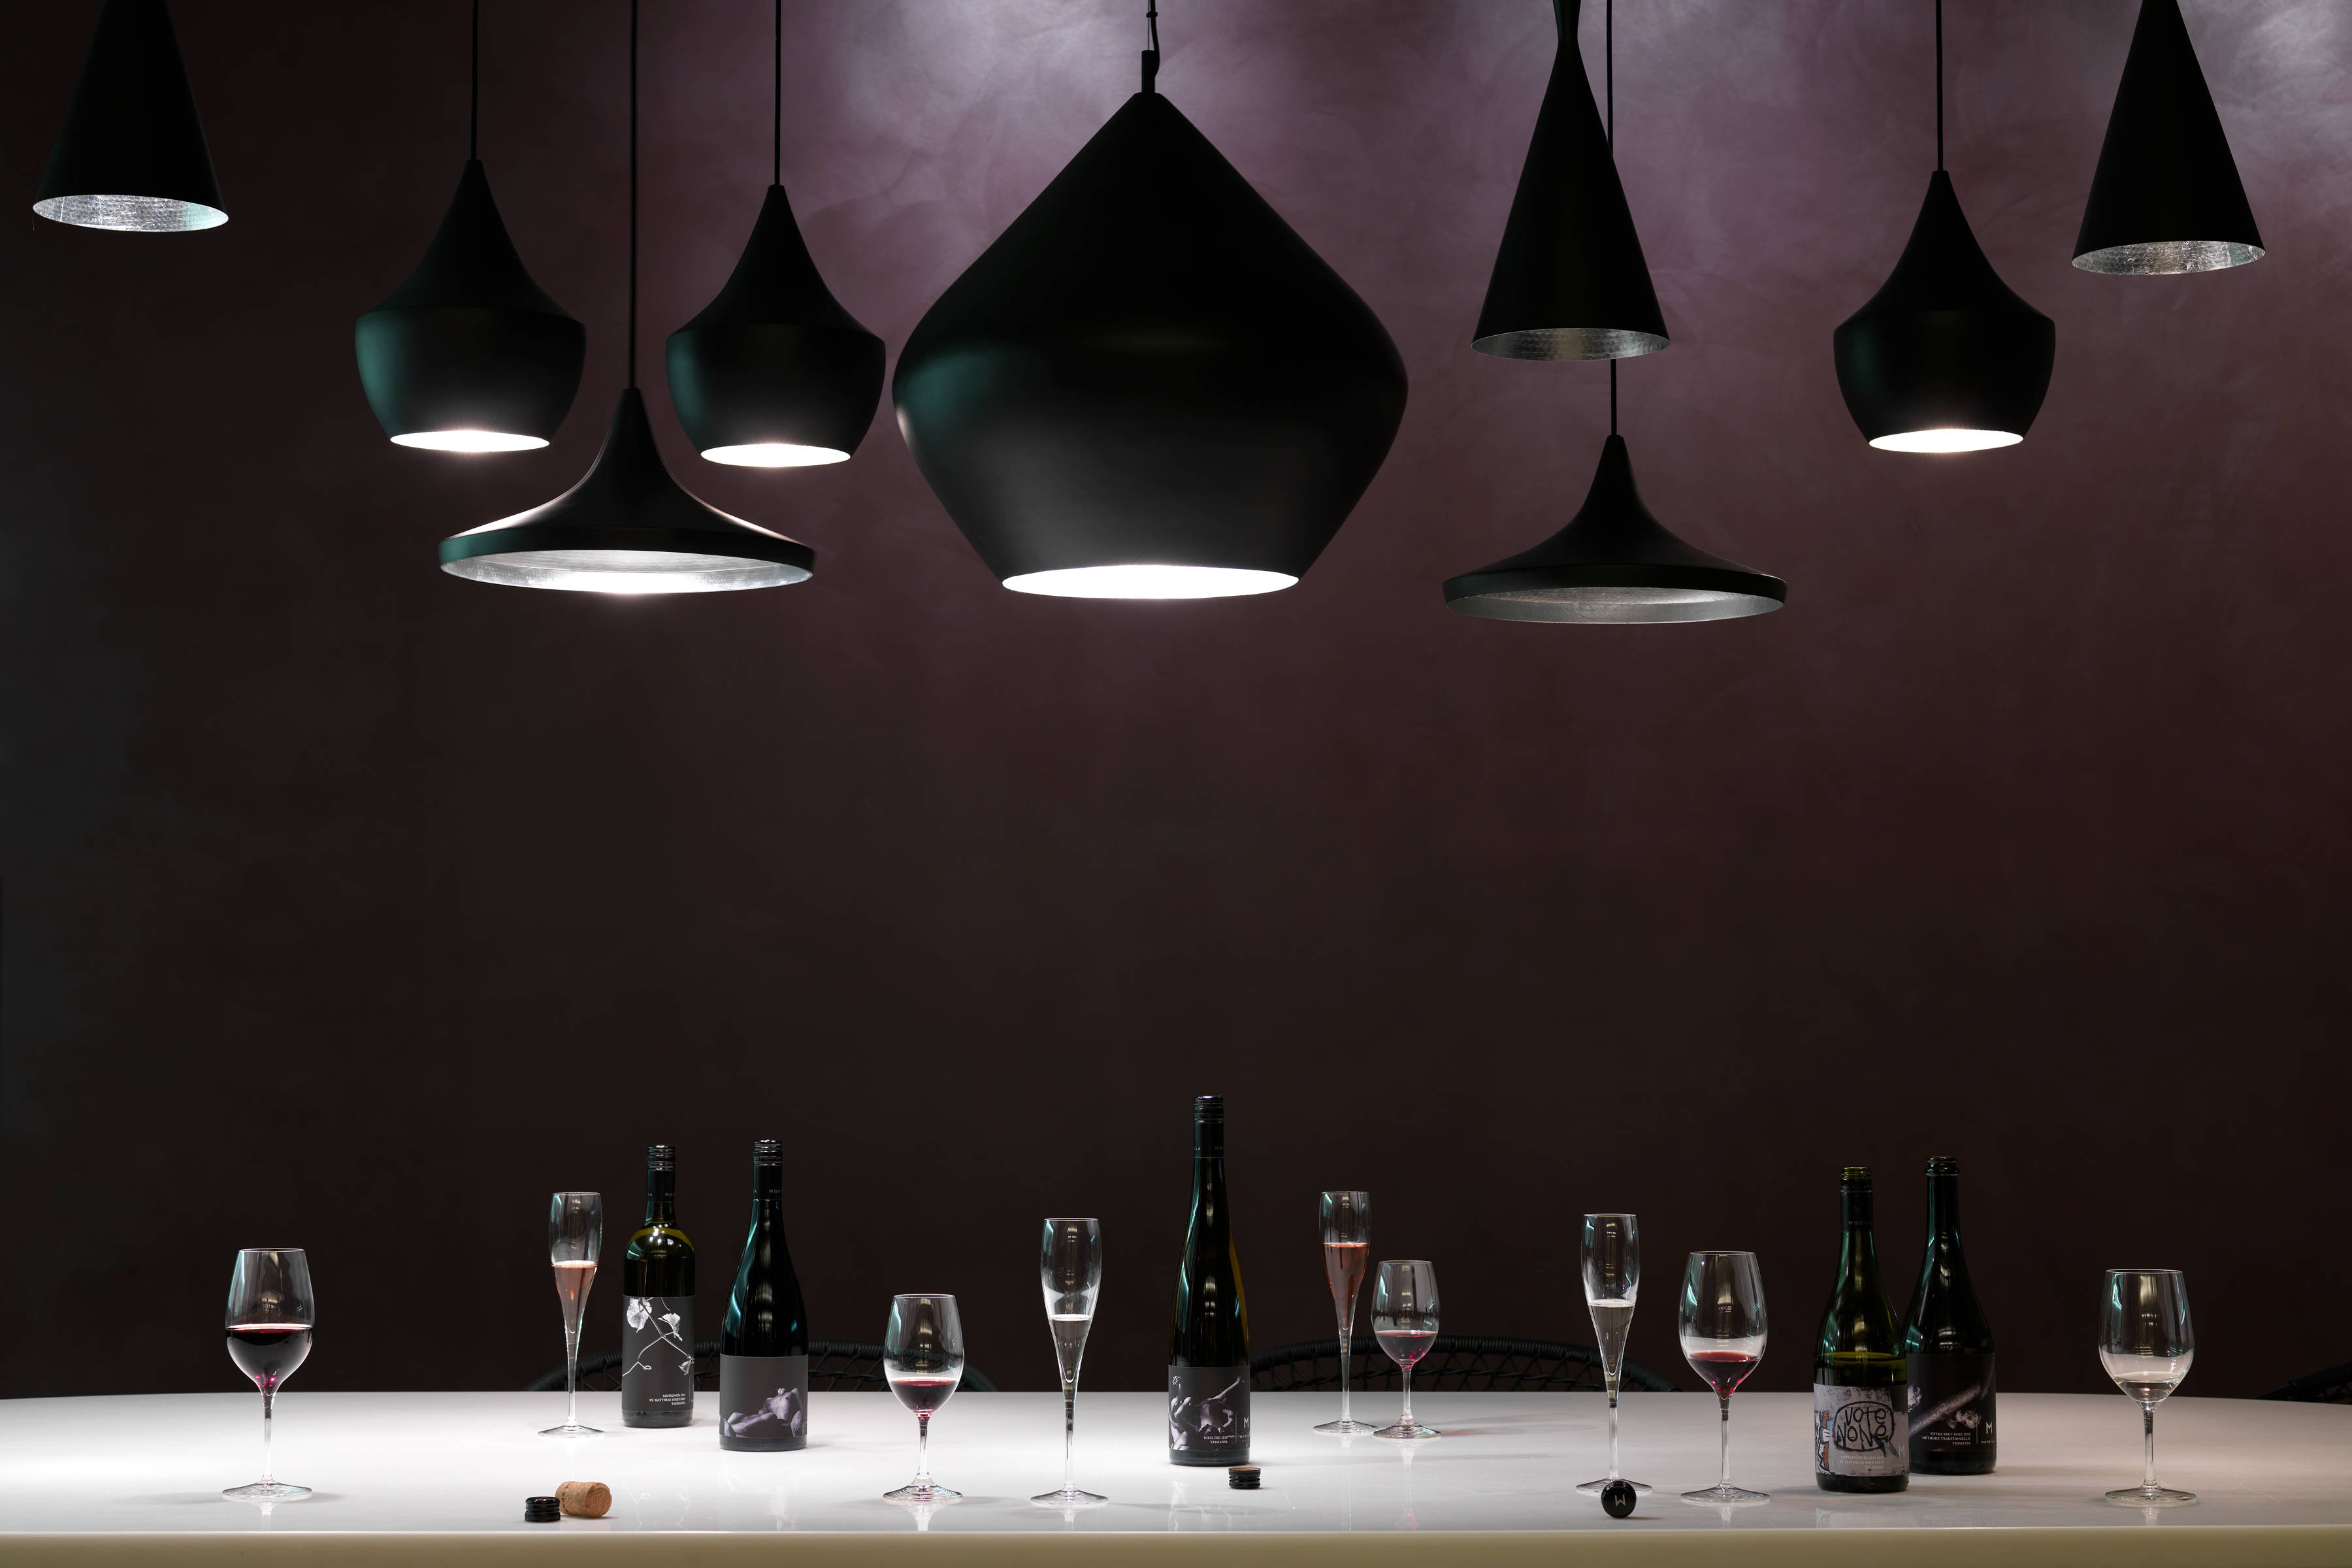 Moorilla’s wine tasting room featuring dark painted walls and dark pendant lights above the wine tasting table, on which five wine bottles and nine wine glasses sit.